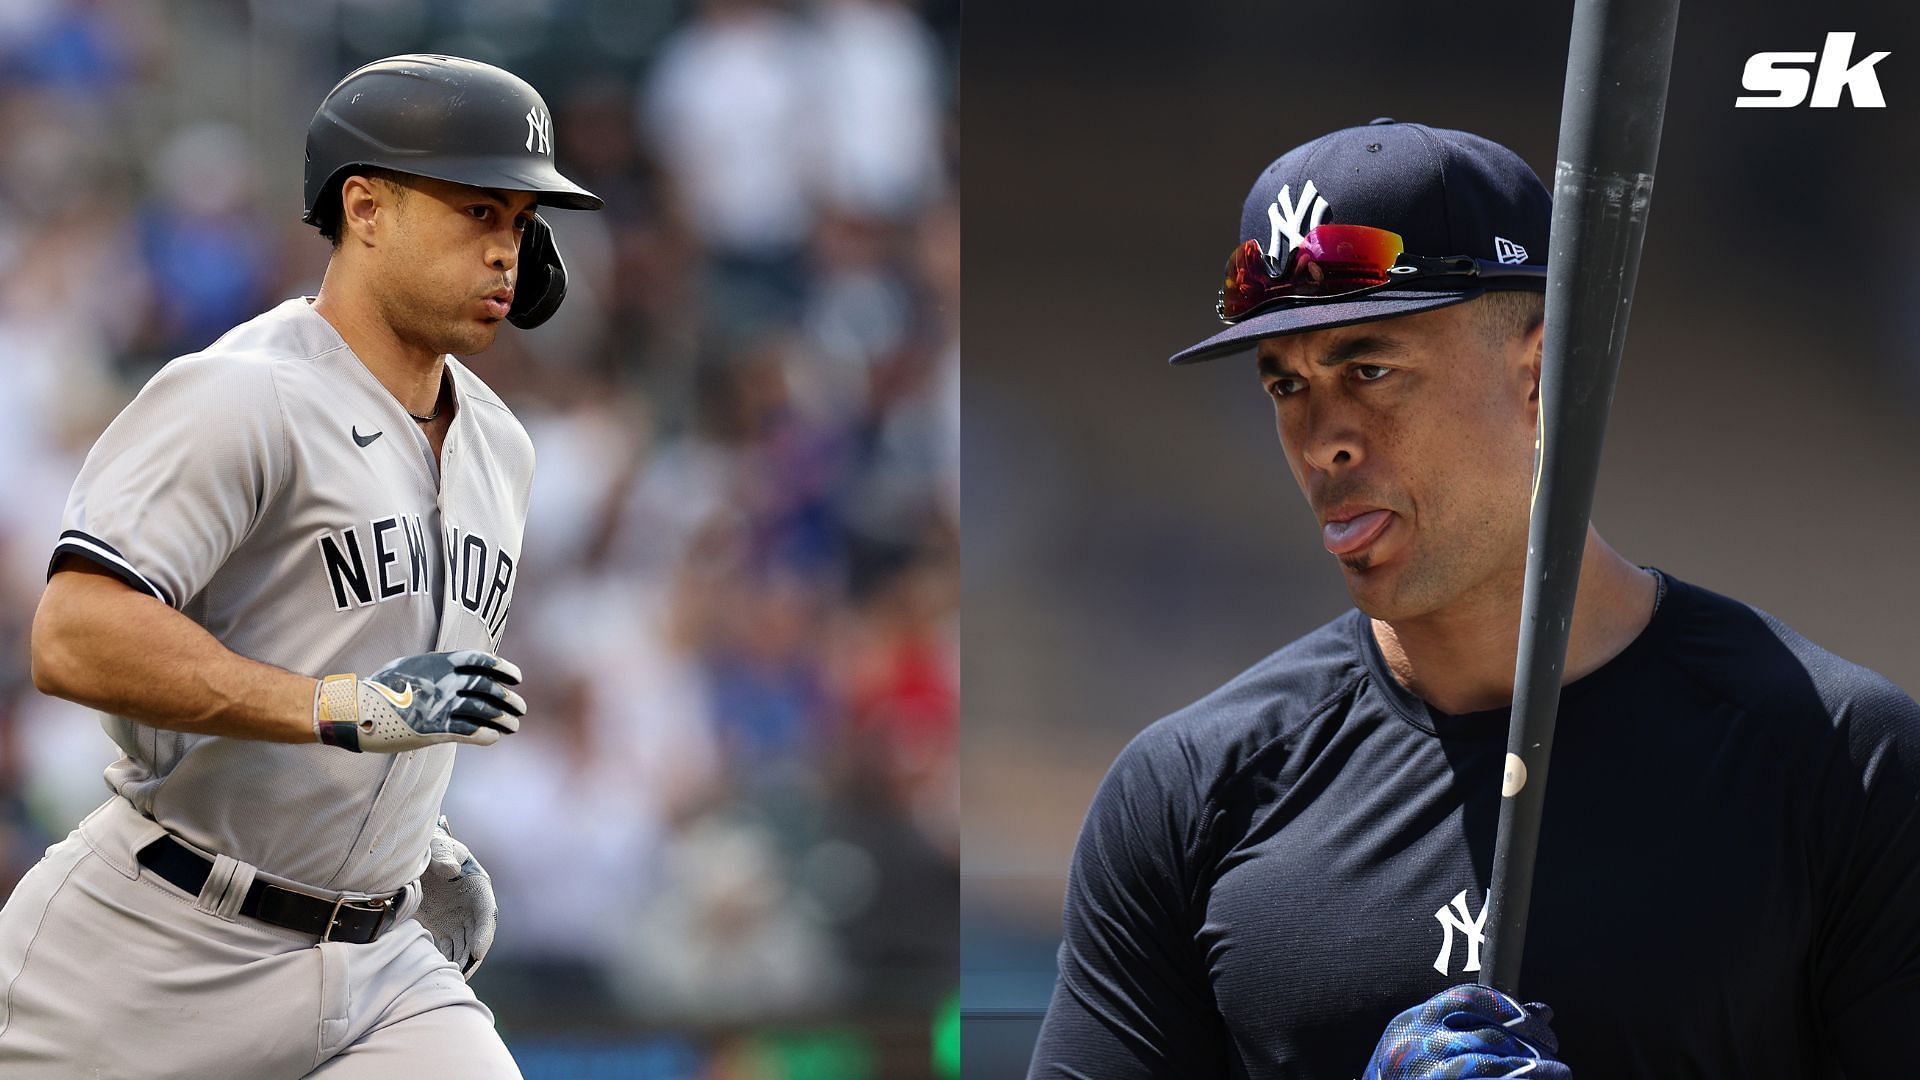 Giancarlo Stanton appears to be somewhat cursed